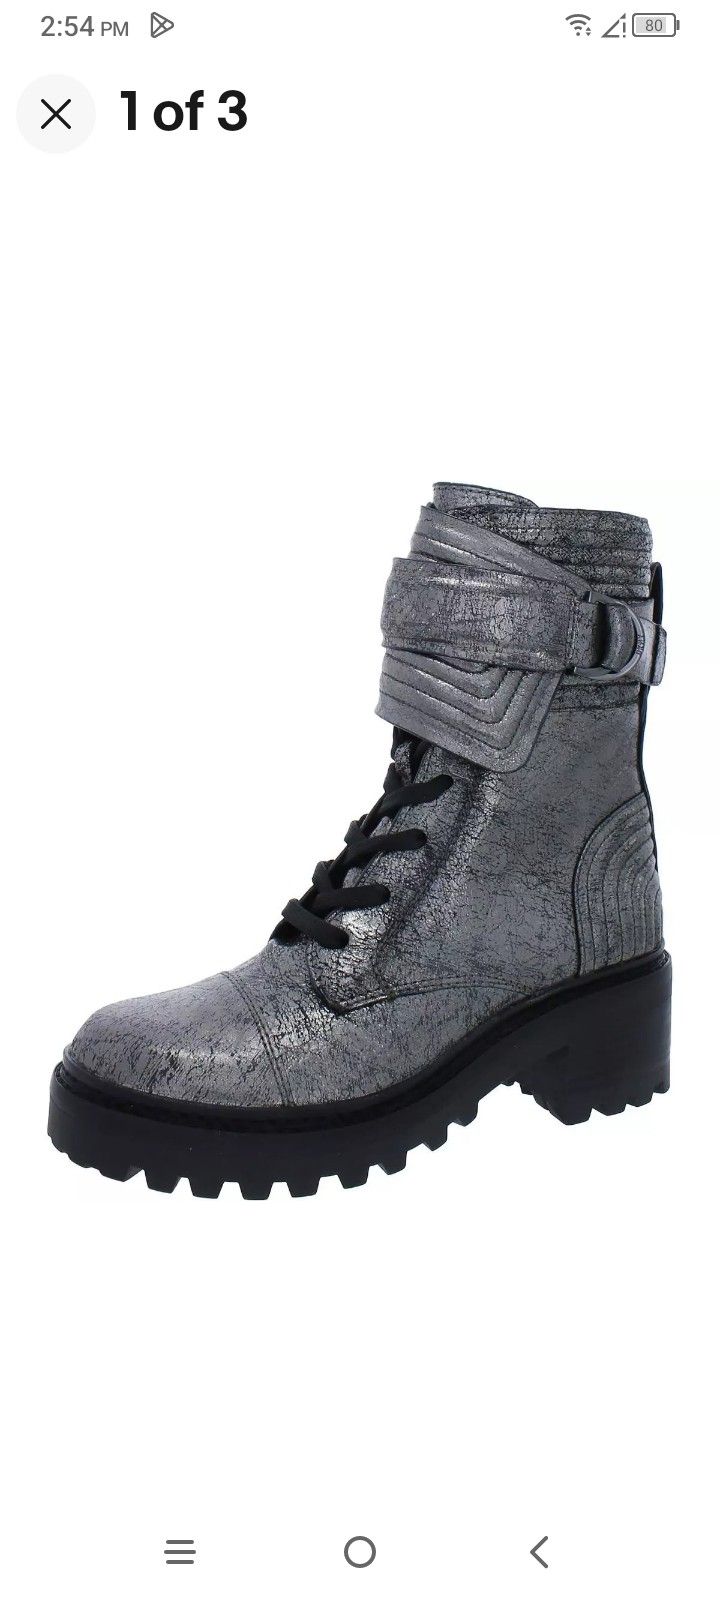 DKNY WOMENS BASIA LEATHER METALLIC CASUAL COMBAT & LACE-UP BOOTS SHOES BHFO 5757